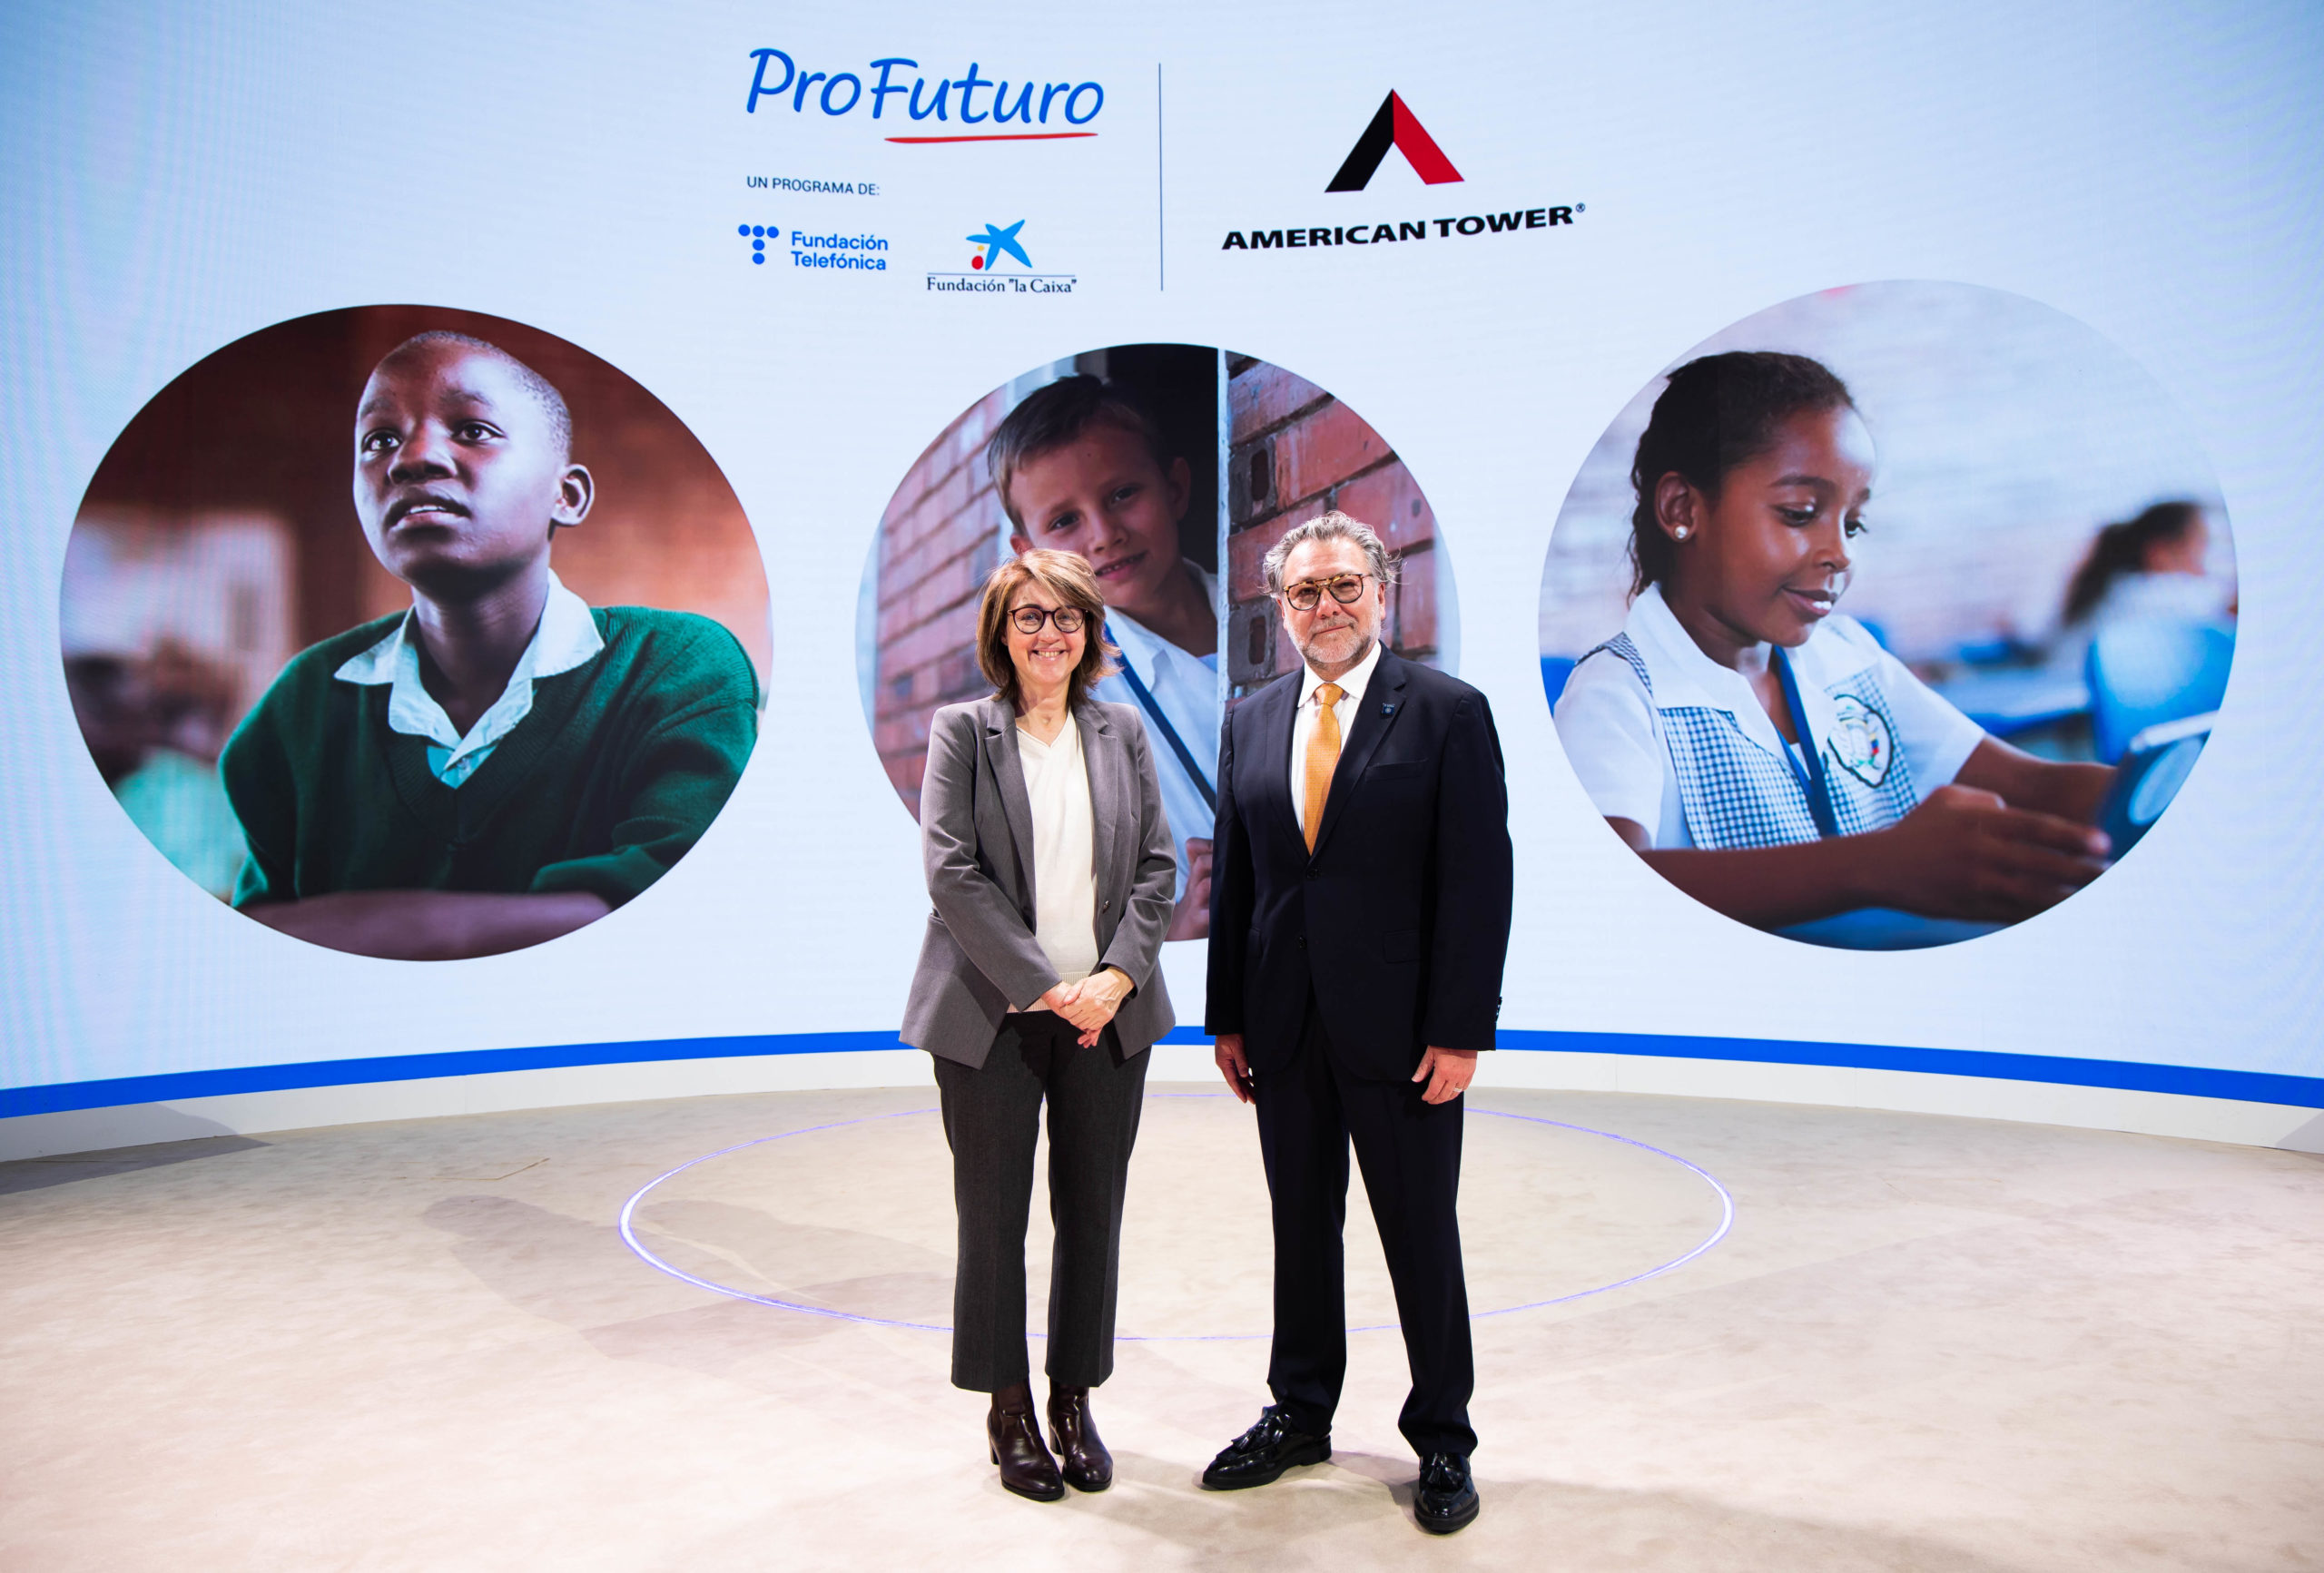 ProFuturo and American Tower join forces to bring educational innovation with technology to vulnerable schools in Latin America and Africa